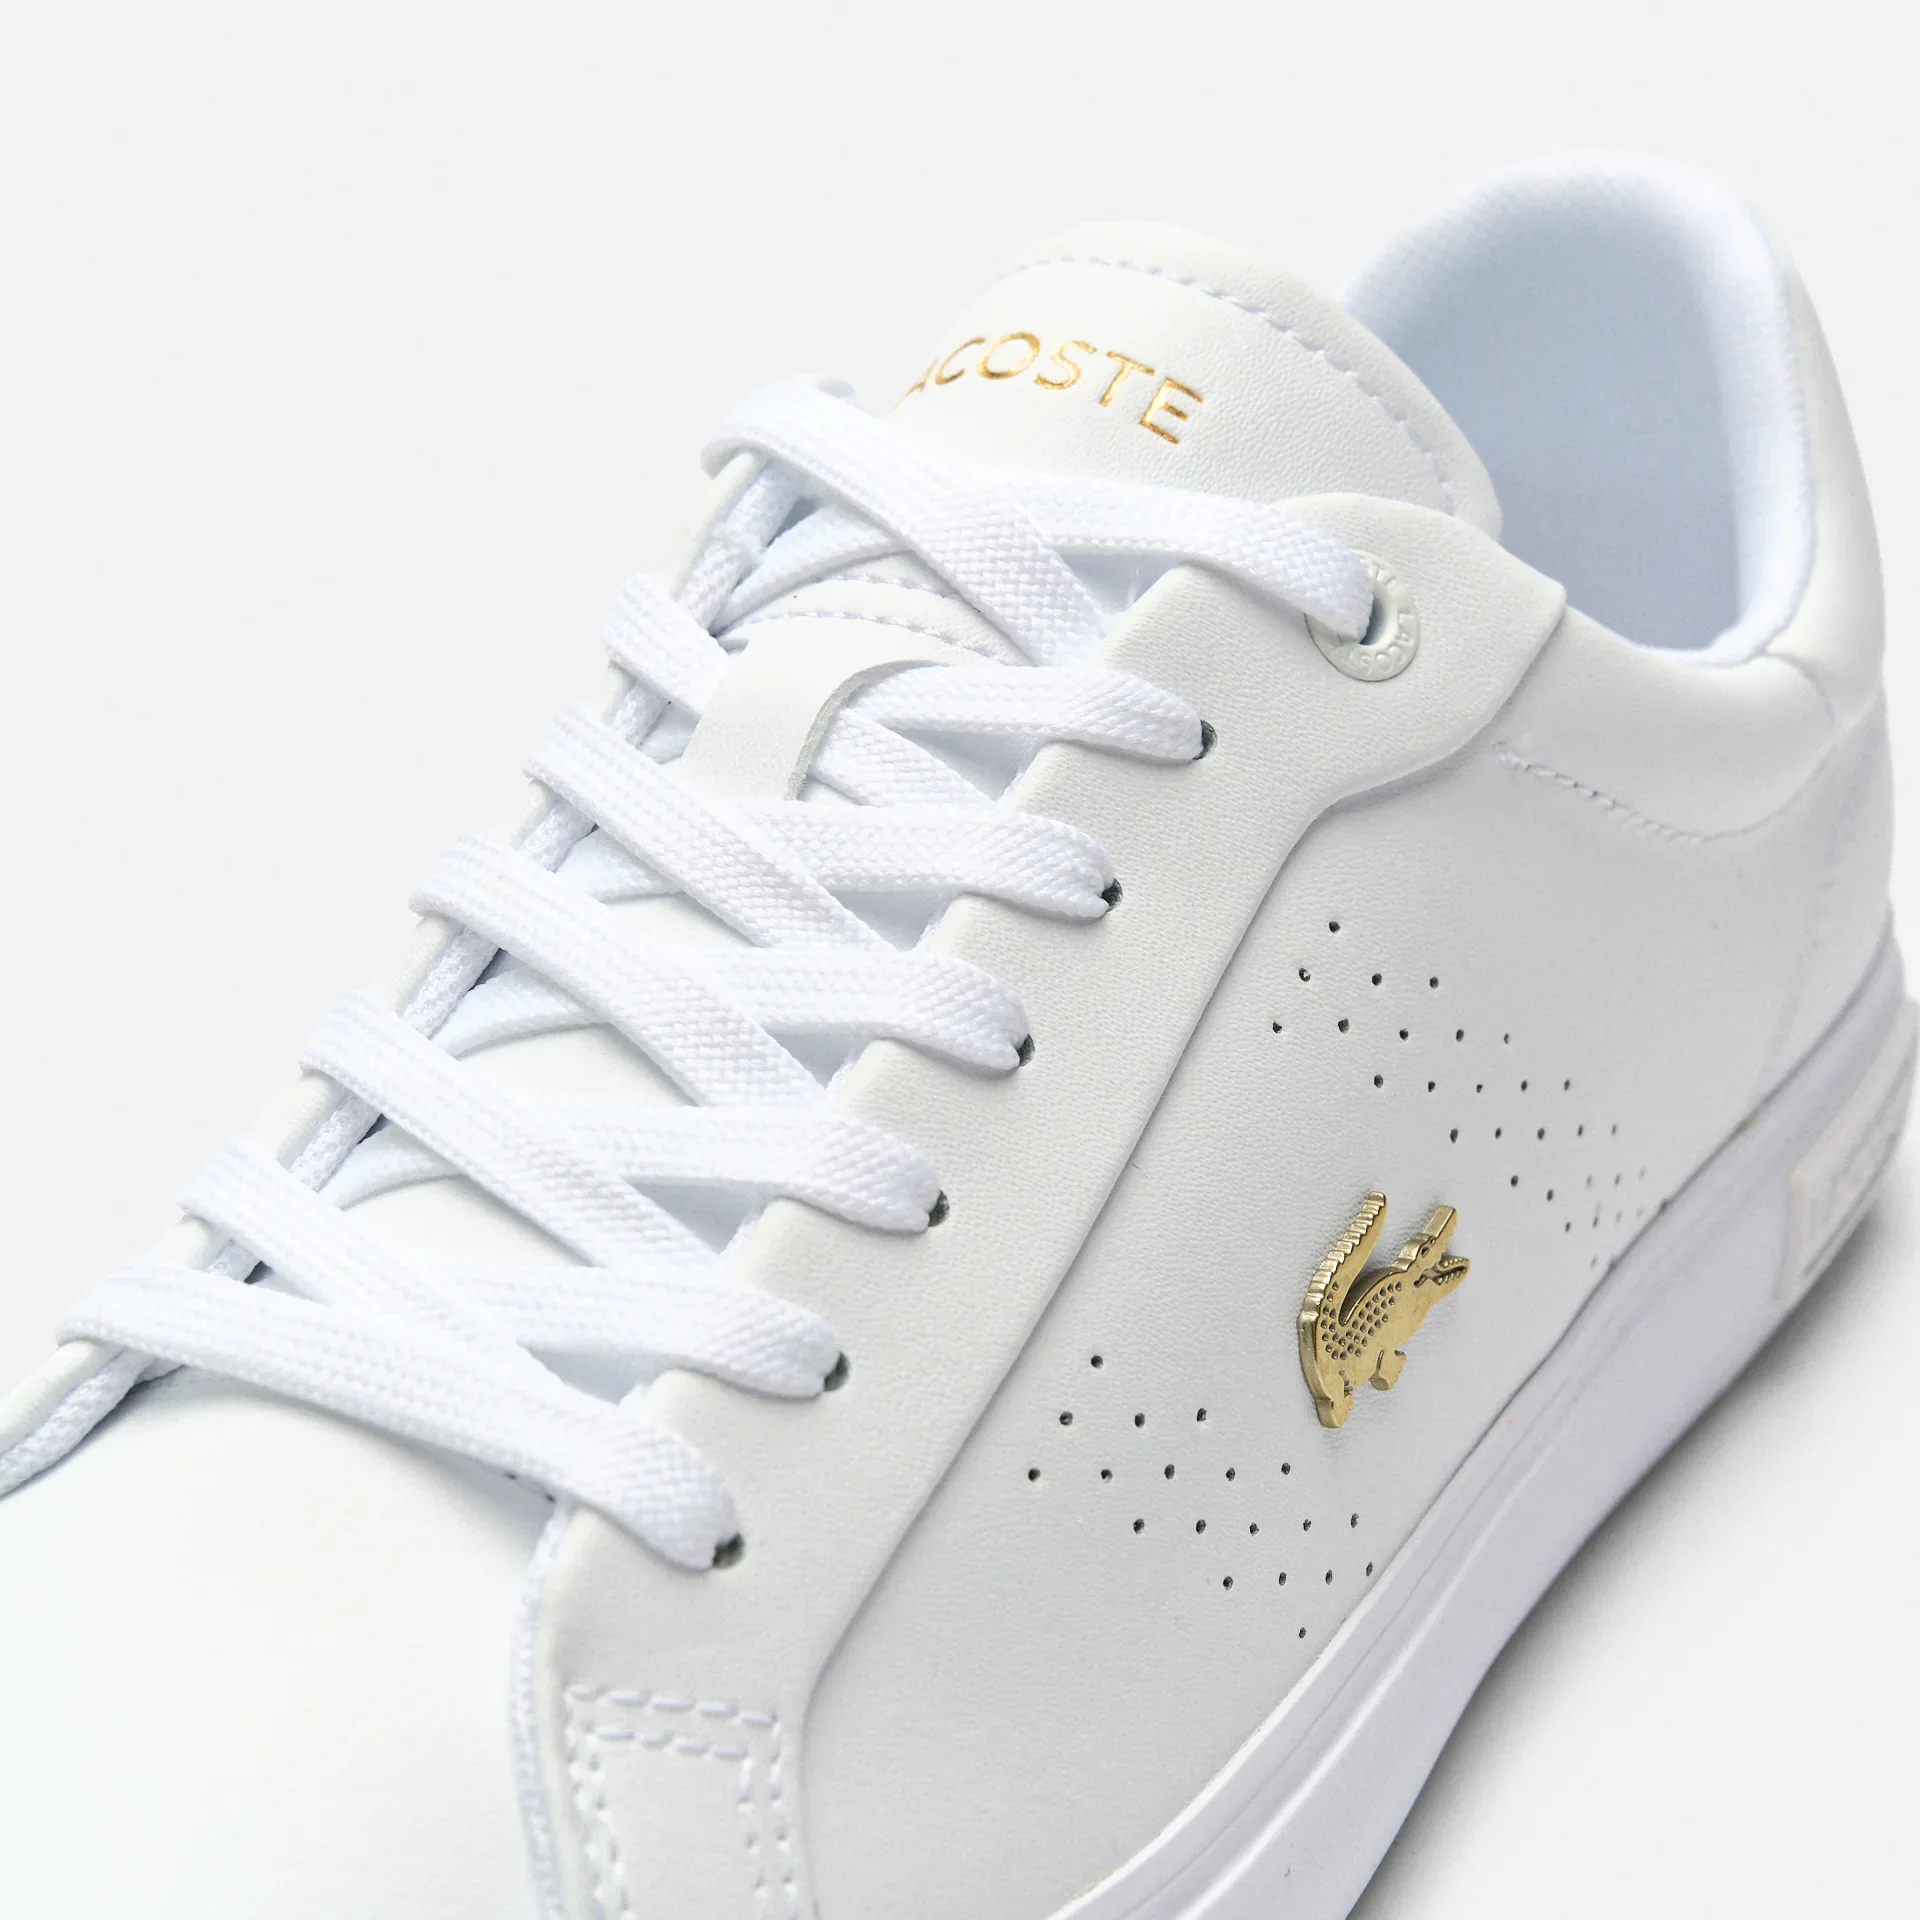 Lacoste Powercourt 2.0 Leather Sneaker White/Gold